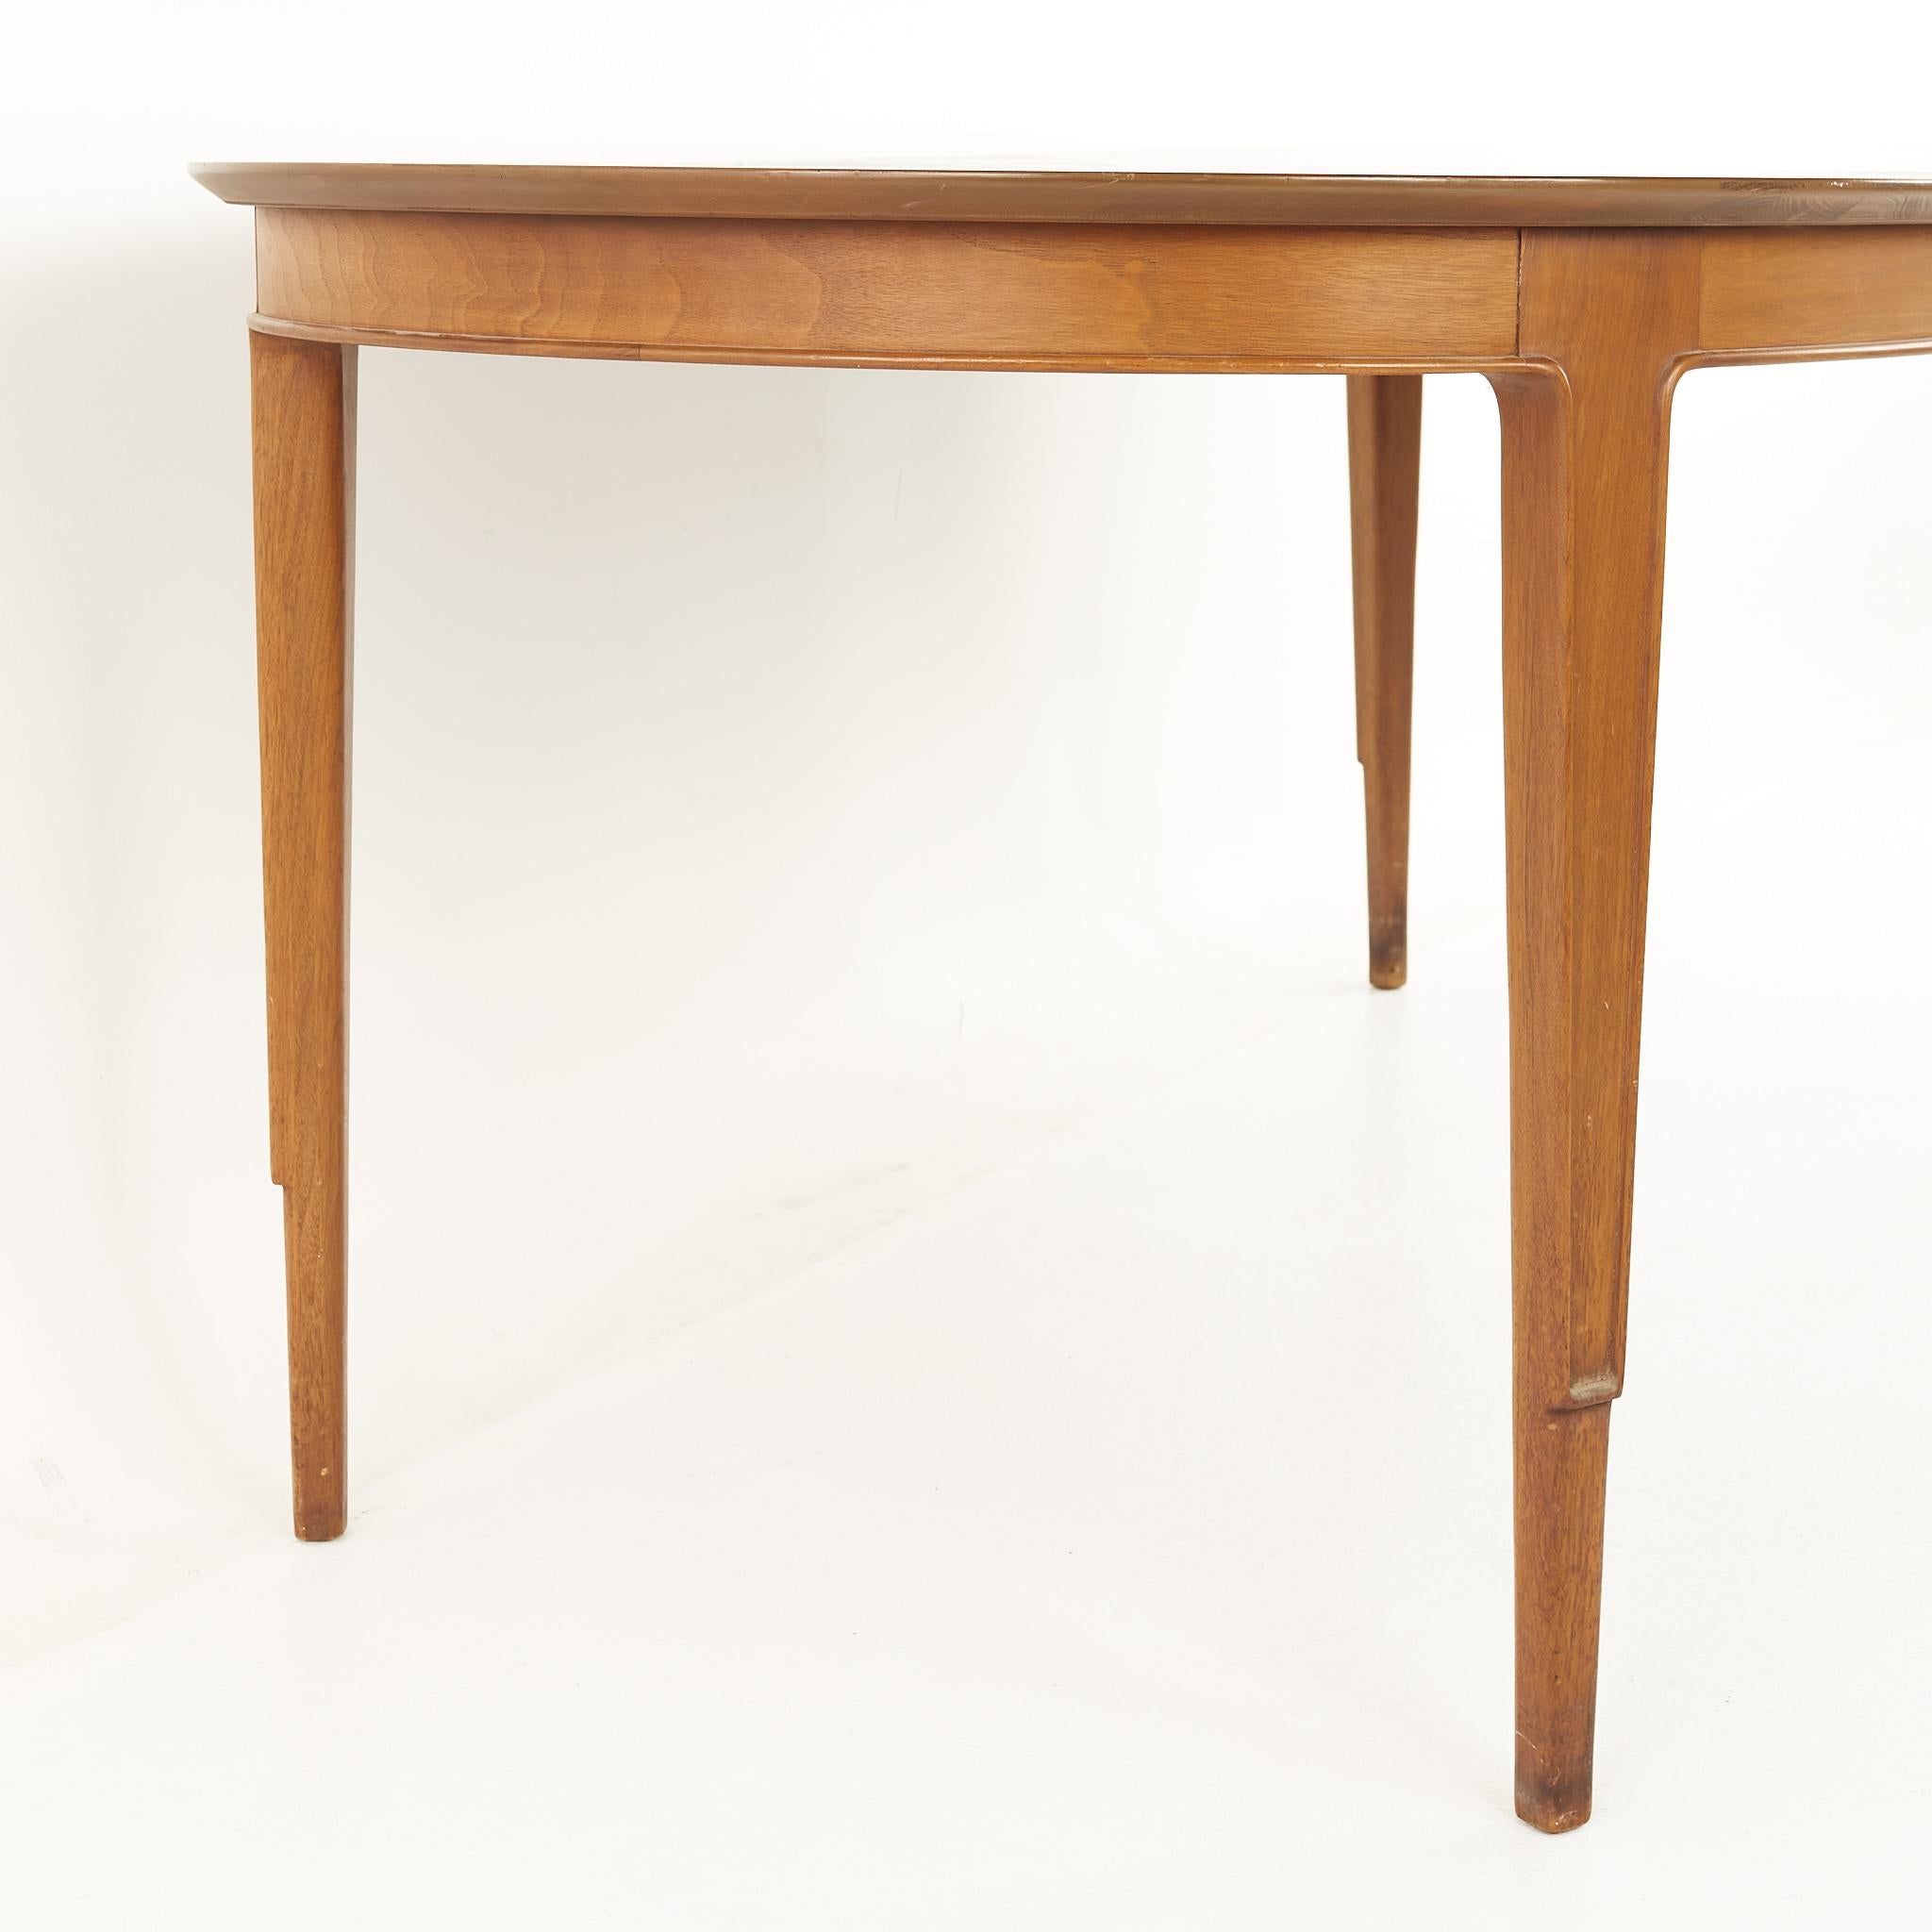 Mount Airy Janus Mid Century Dining Table with 2 Leaves 10